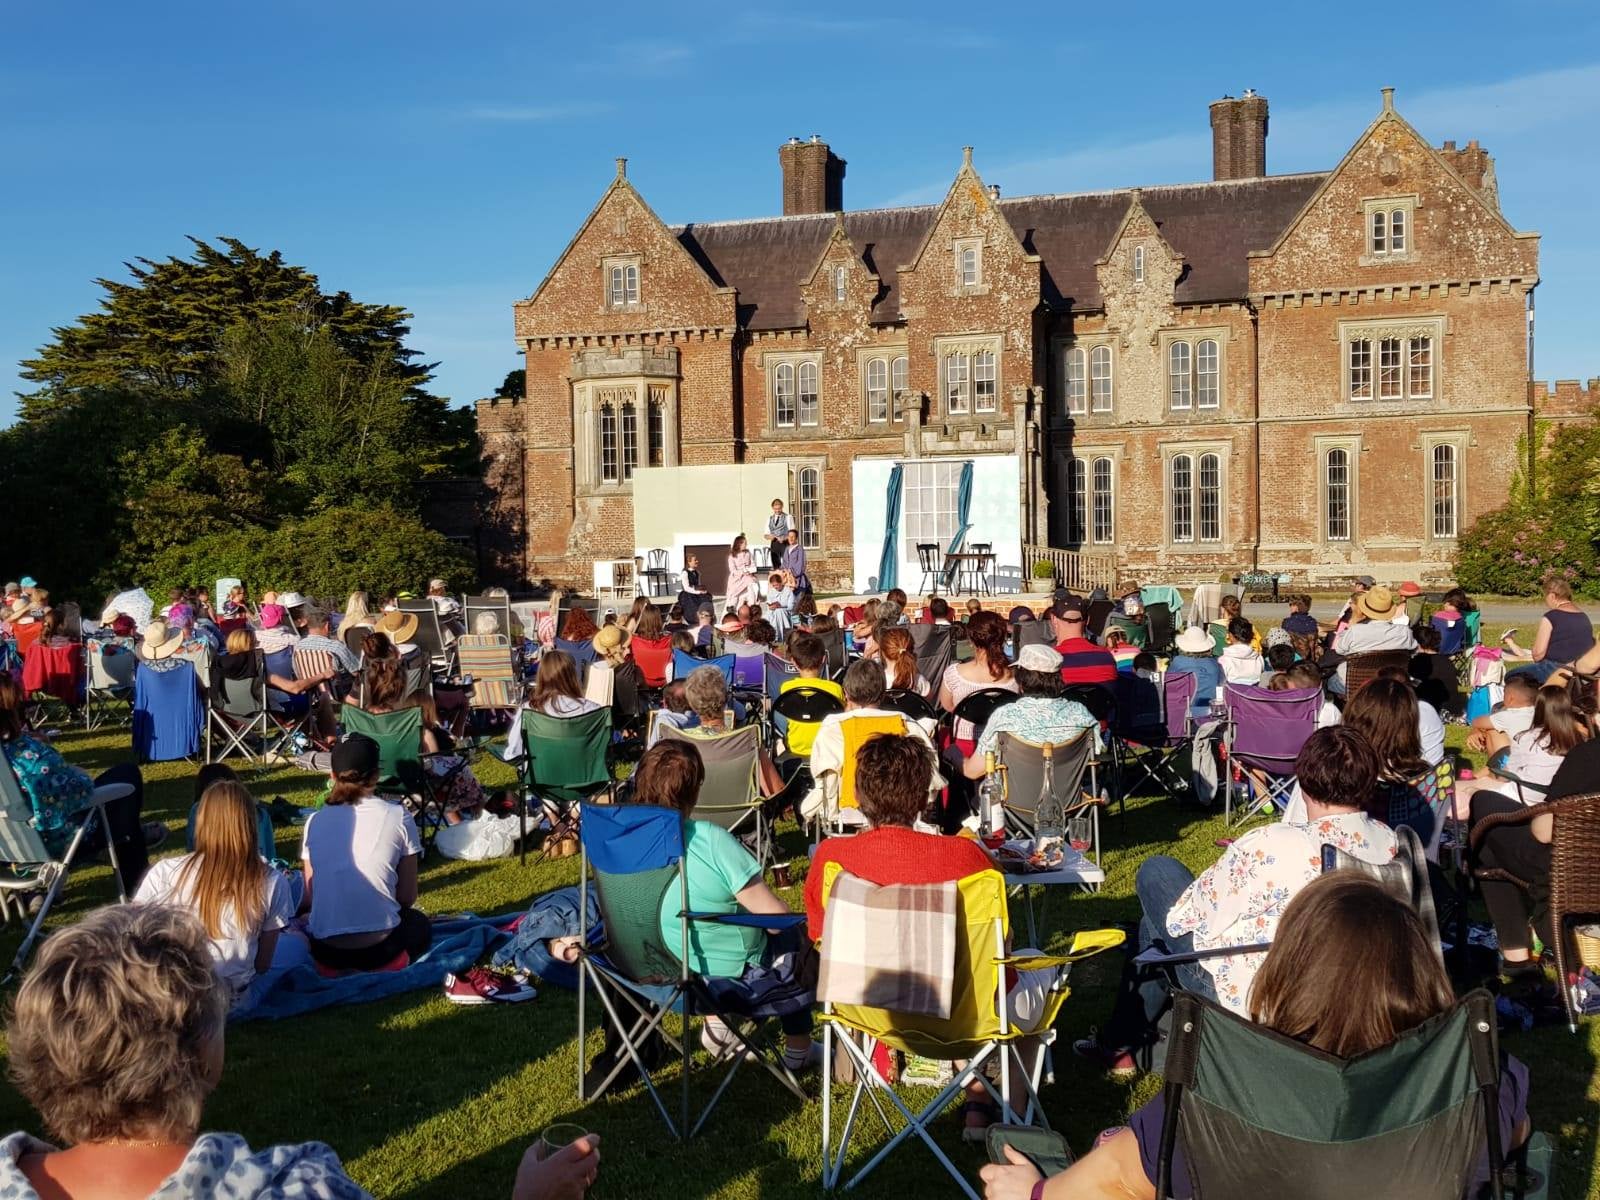 Enjoy an unforgettable night of open air theatre at Wells House and Gardens and enjoy the timeless fairytale "Beauty and the Beast" this summer in the stunning setting of Wells House and Gardens, Co Wexford